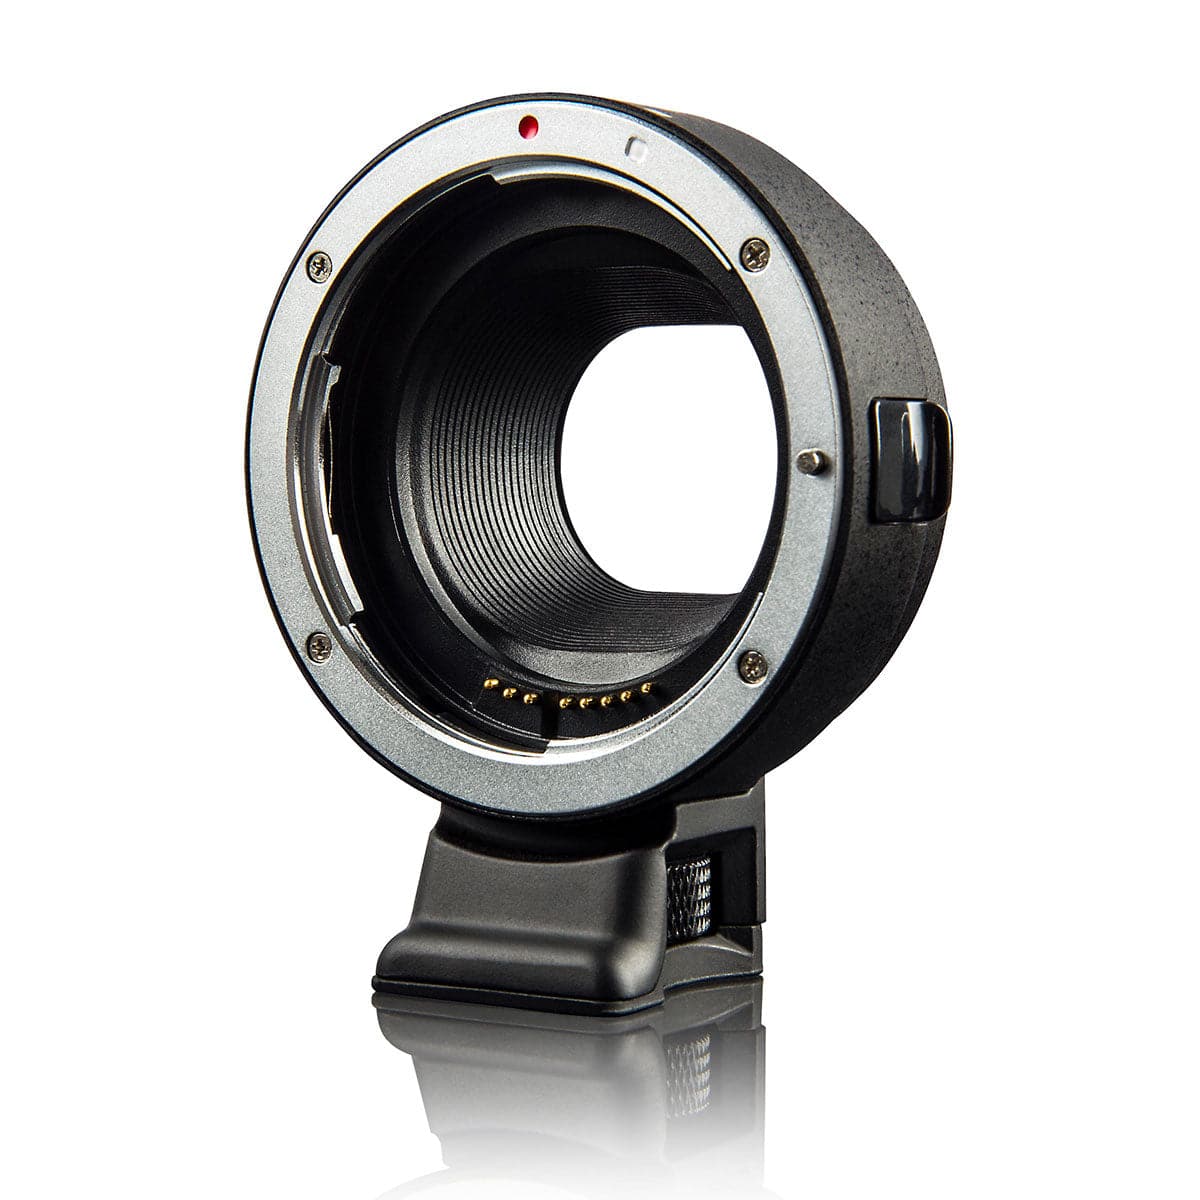 VILTROX EF-EOS M Lens Mount Auto Focus Adapter - for Canon EOS (EF/EF-S) D/SLR Lens to Canon EOS M